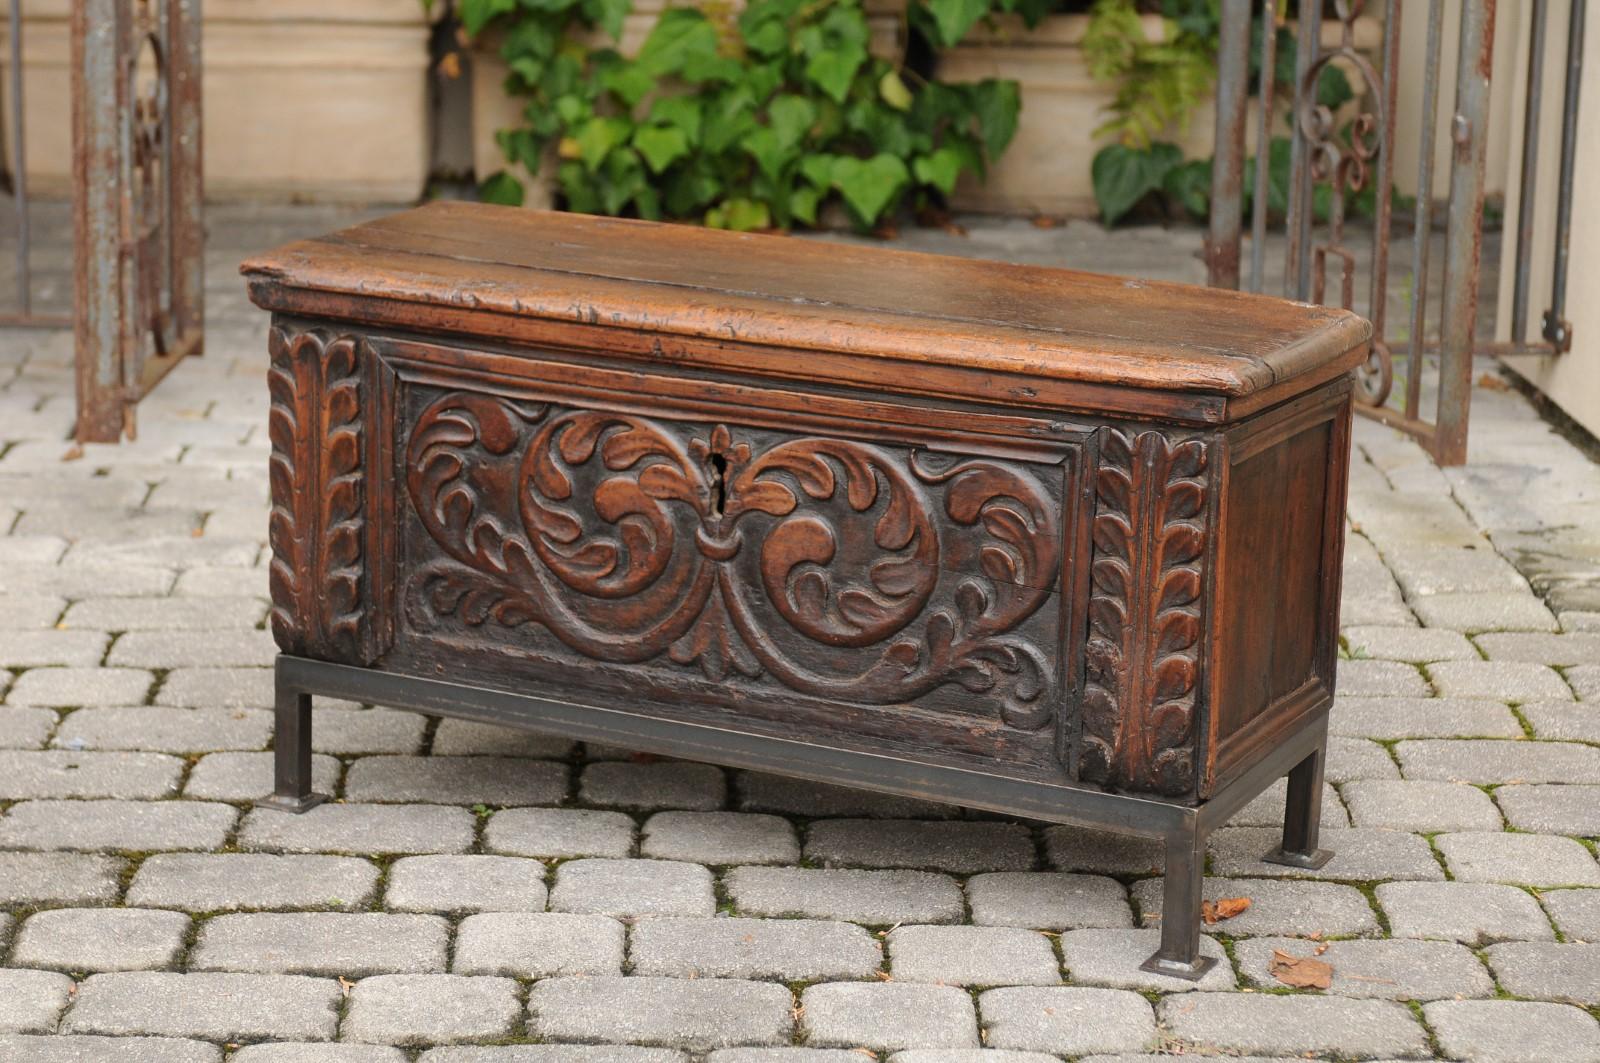 An English George III period hand carved walnut coffer from the late 18th century mounted on a new custom made base. Born in the later years of the 18th century, this exquisite coffer features a rectangular lid with rounded edges, opening to reveal